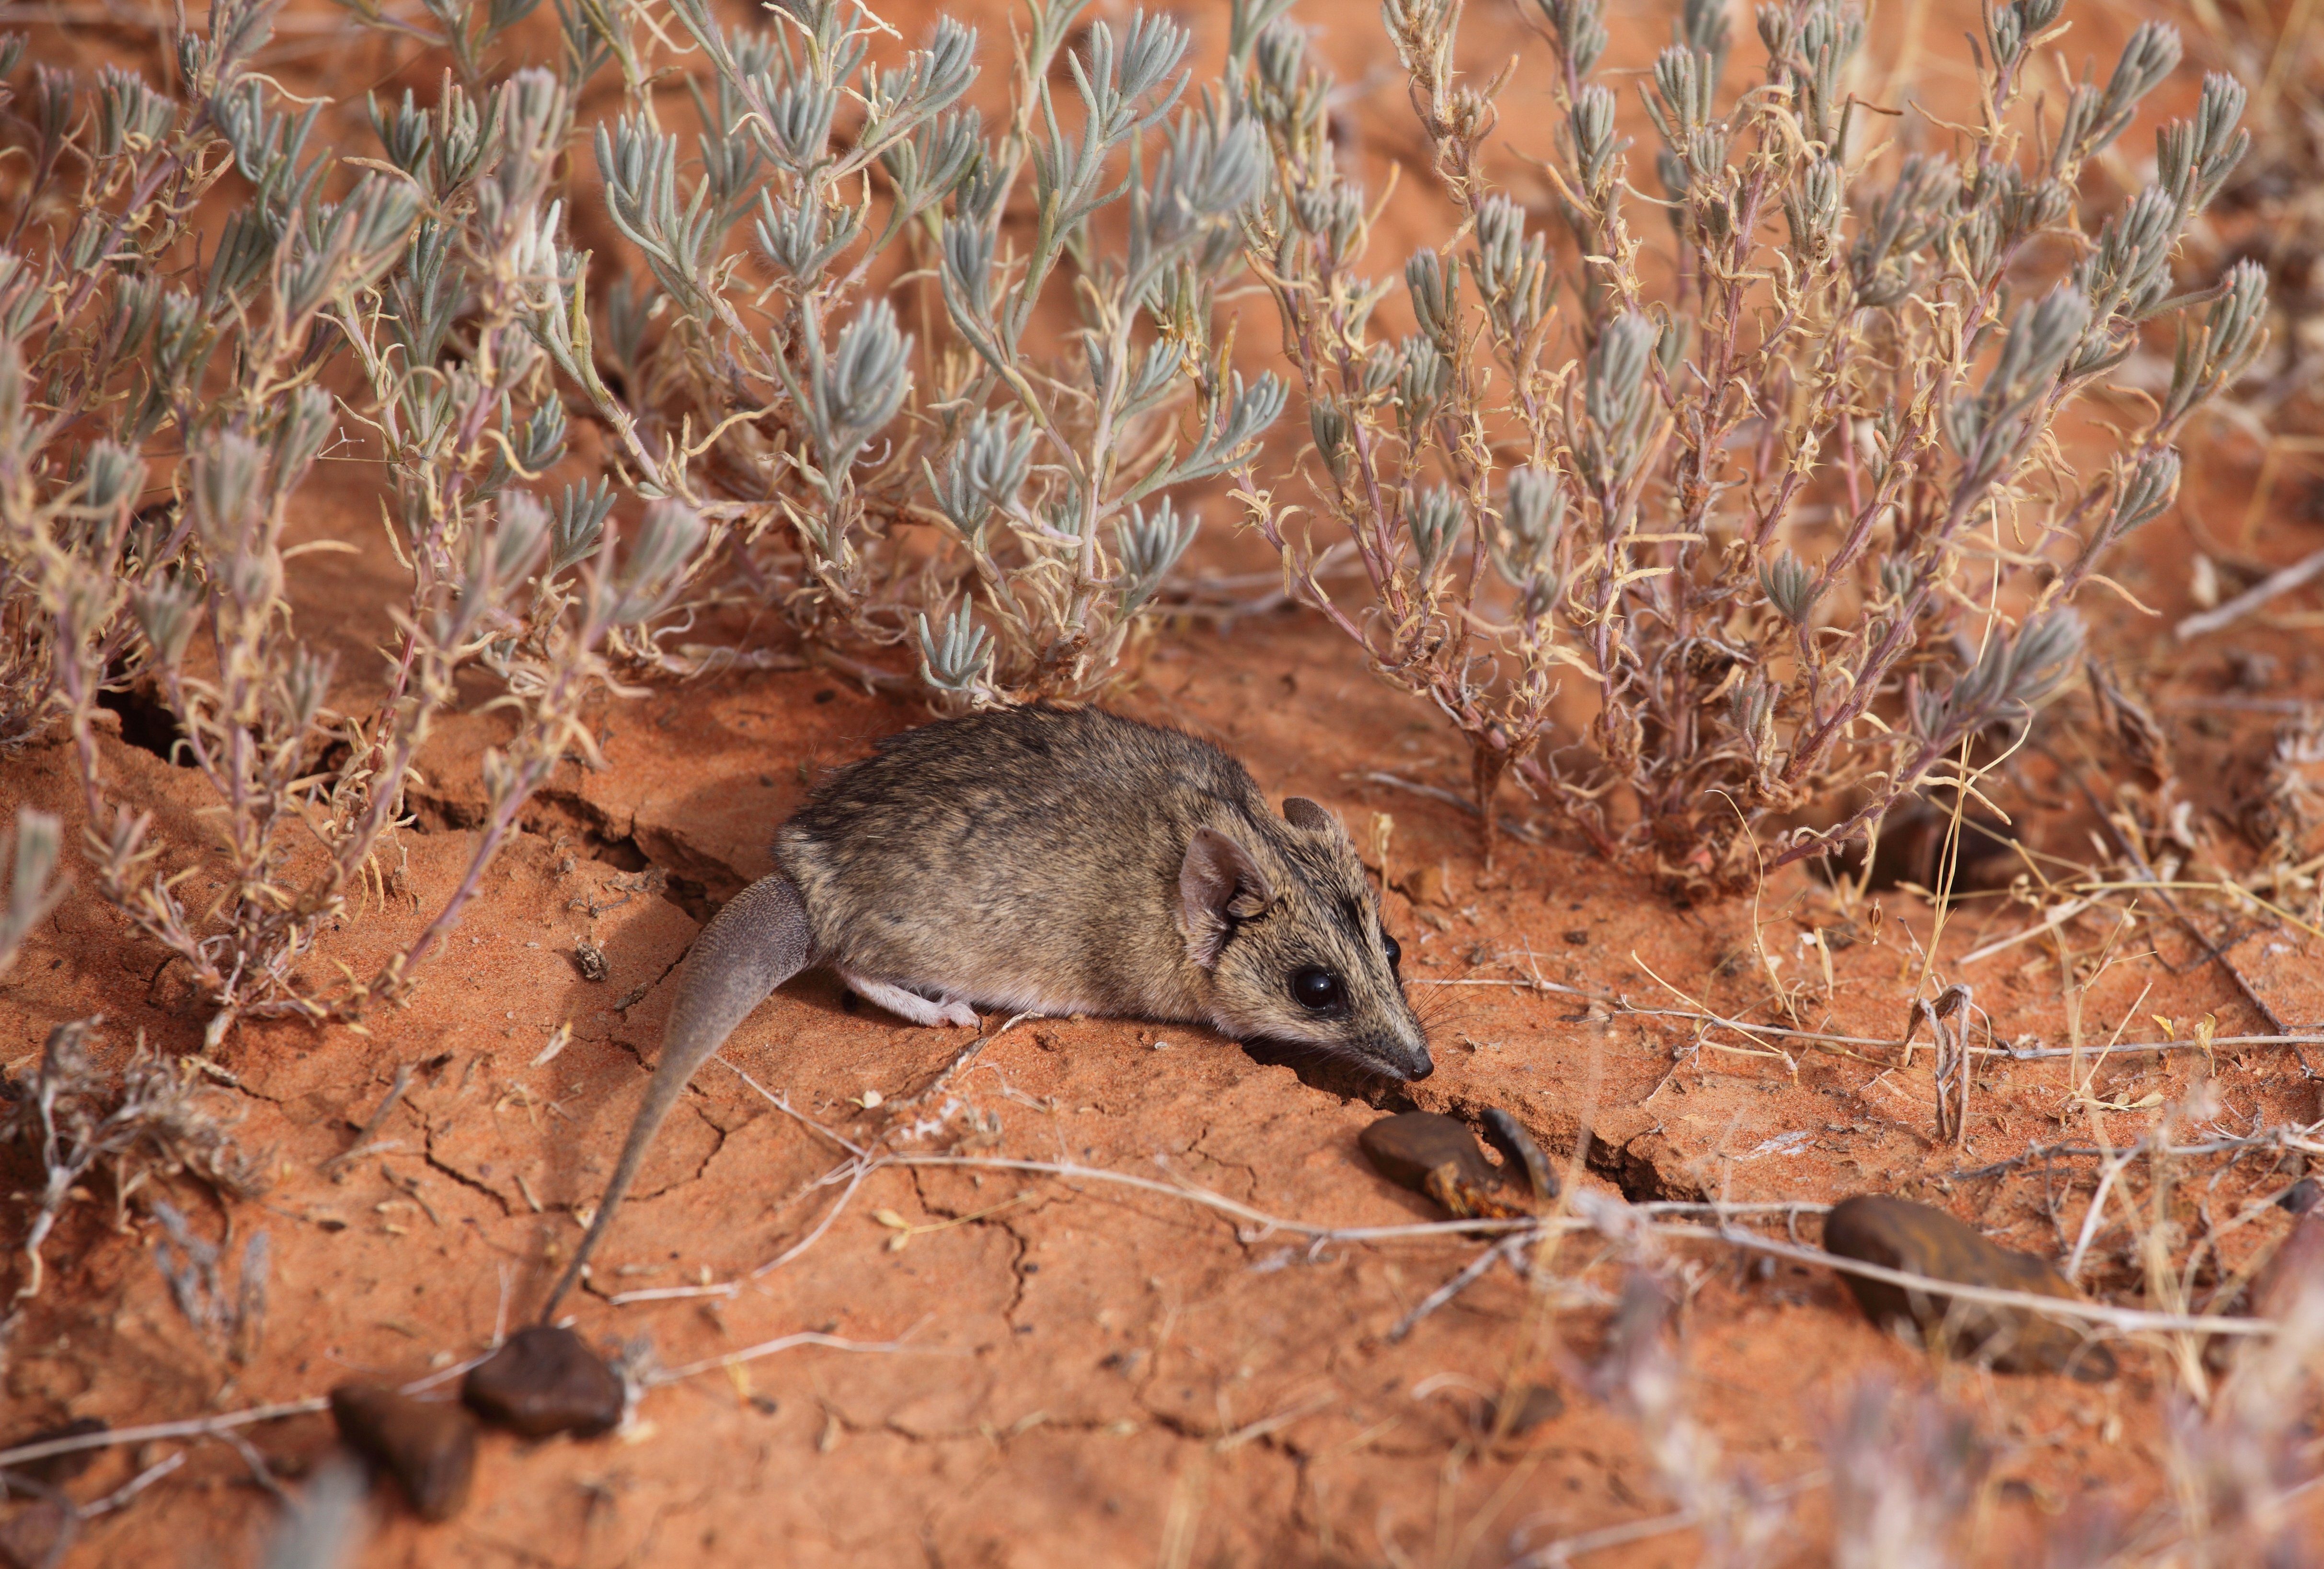 A Stripe-faced Dunnart, a small carnivorous marsupial, in outback Australia's desert.